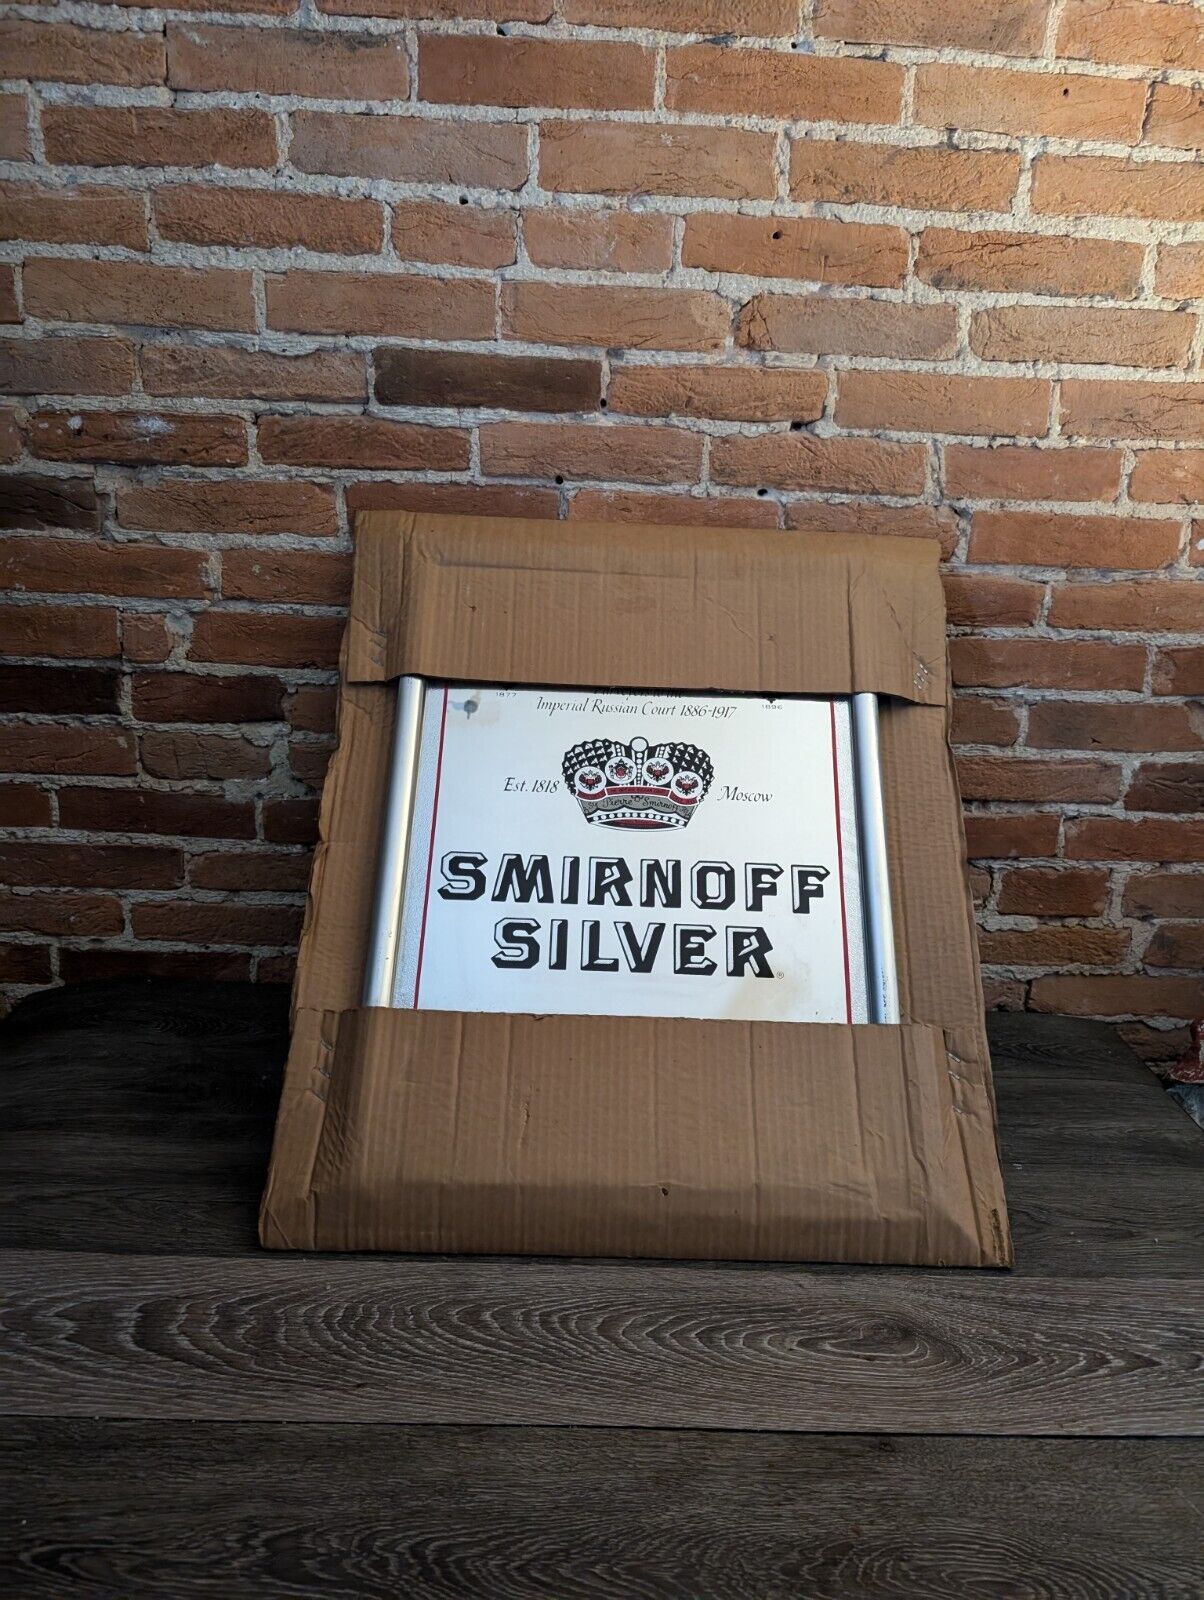 RARE SMIRNOFF SILVER PRIVATE RESERVE MIRRORED SIGN MAN CAVE BAR SIGN COLLECTION